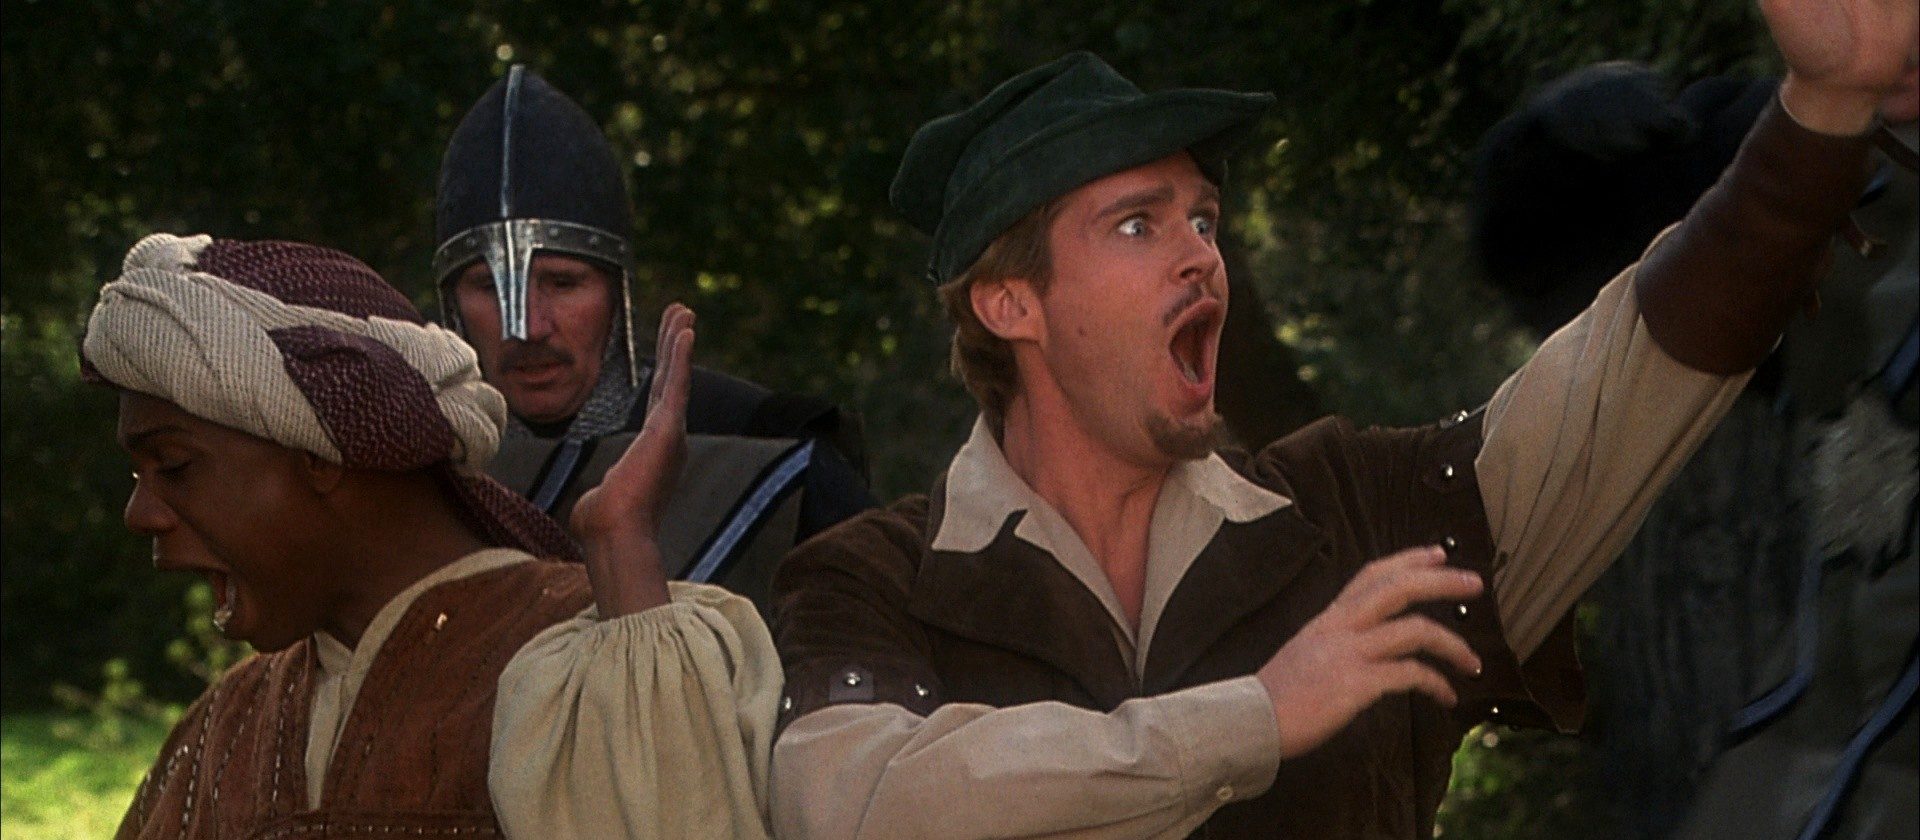 Dave Chappelle as Ahchoo and Cary Elwes as Robin Hood